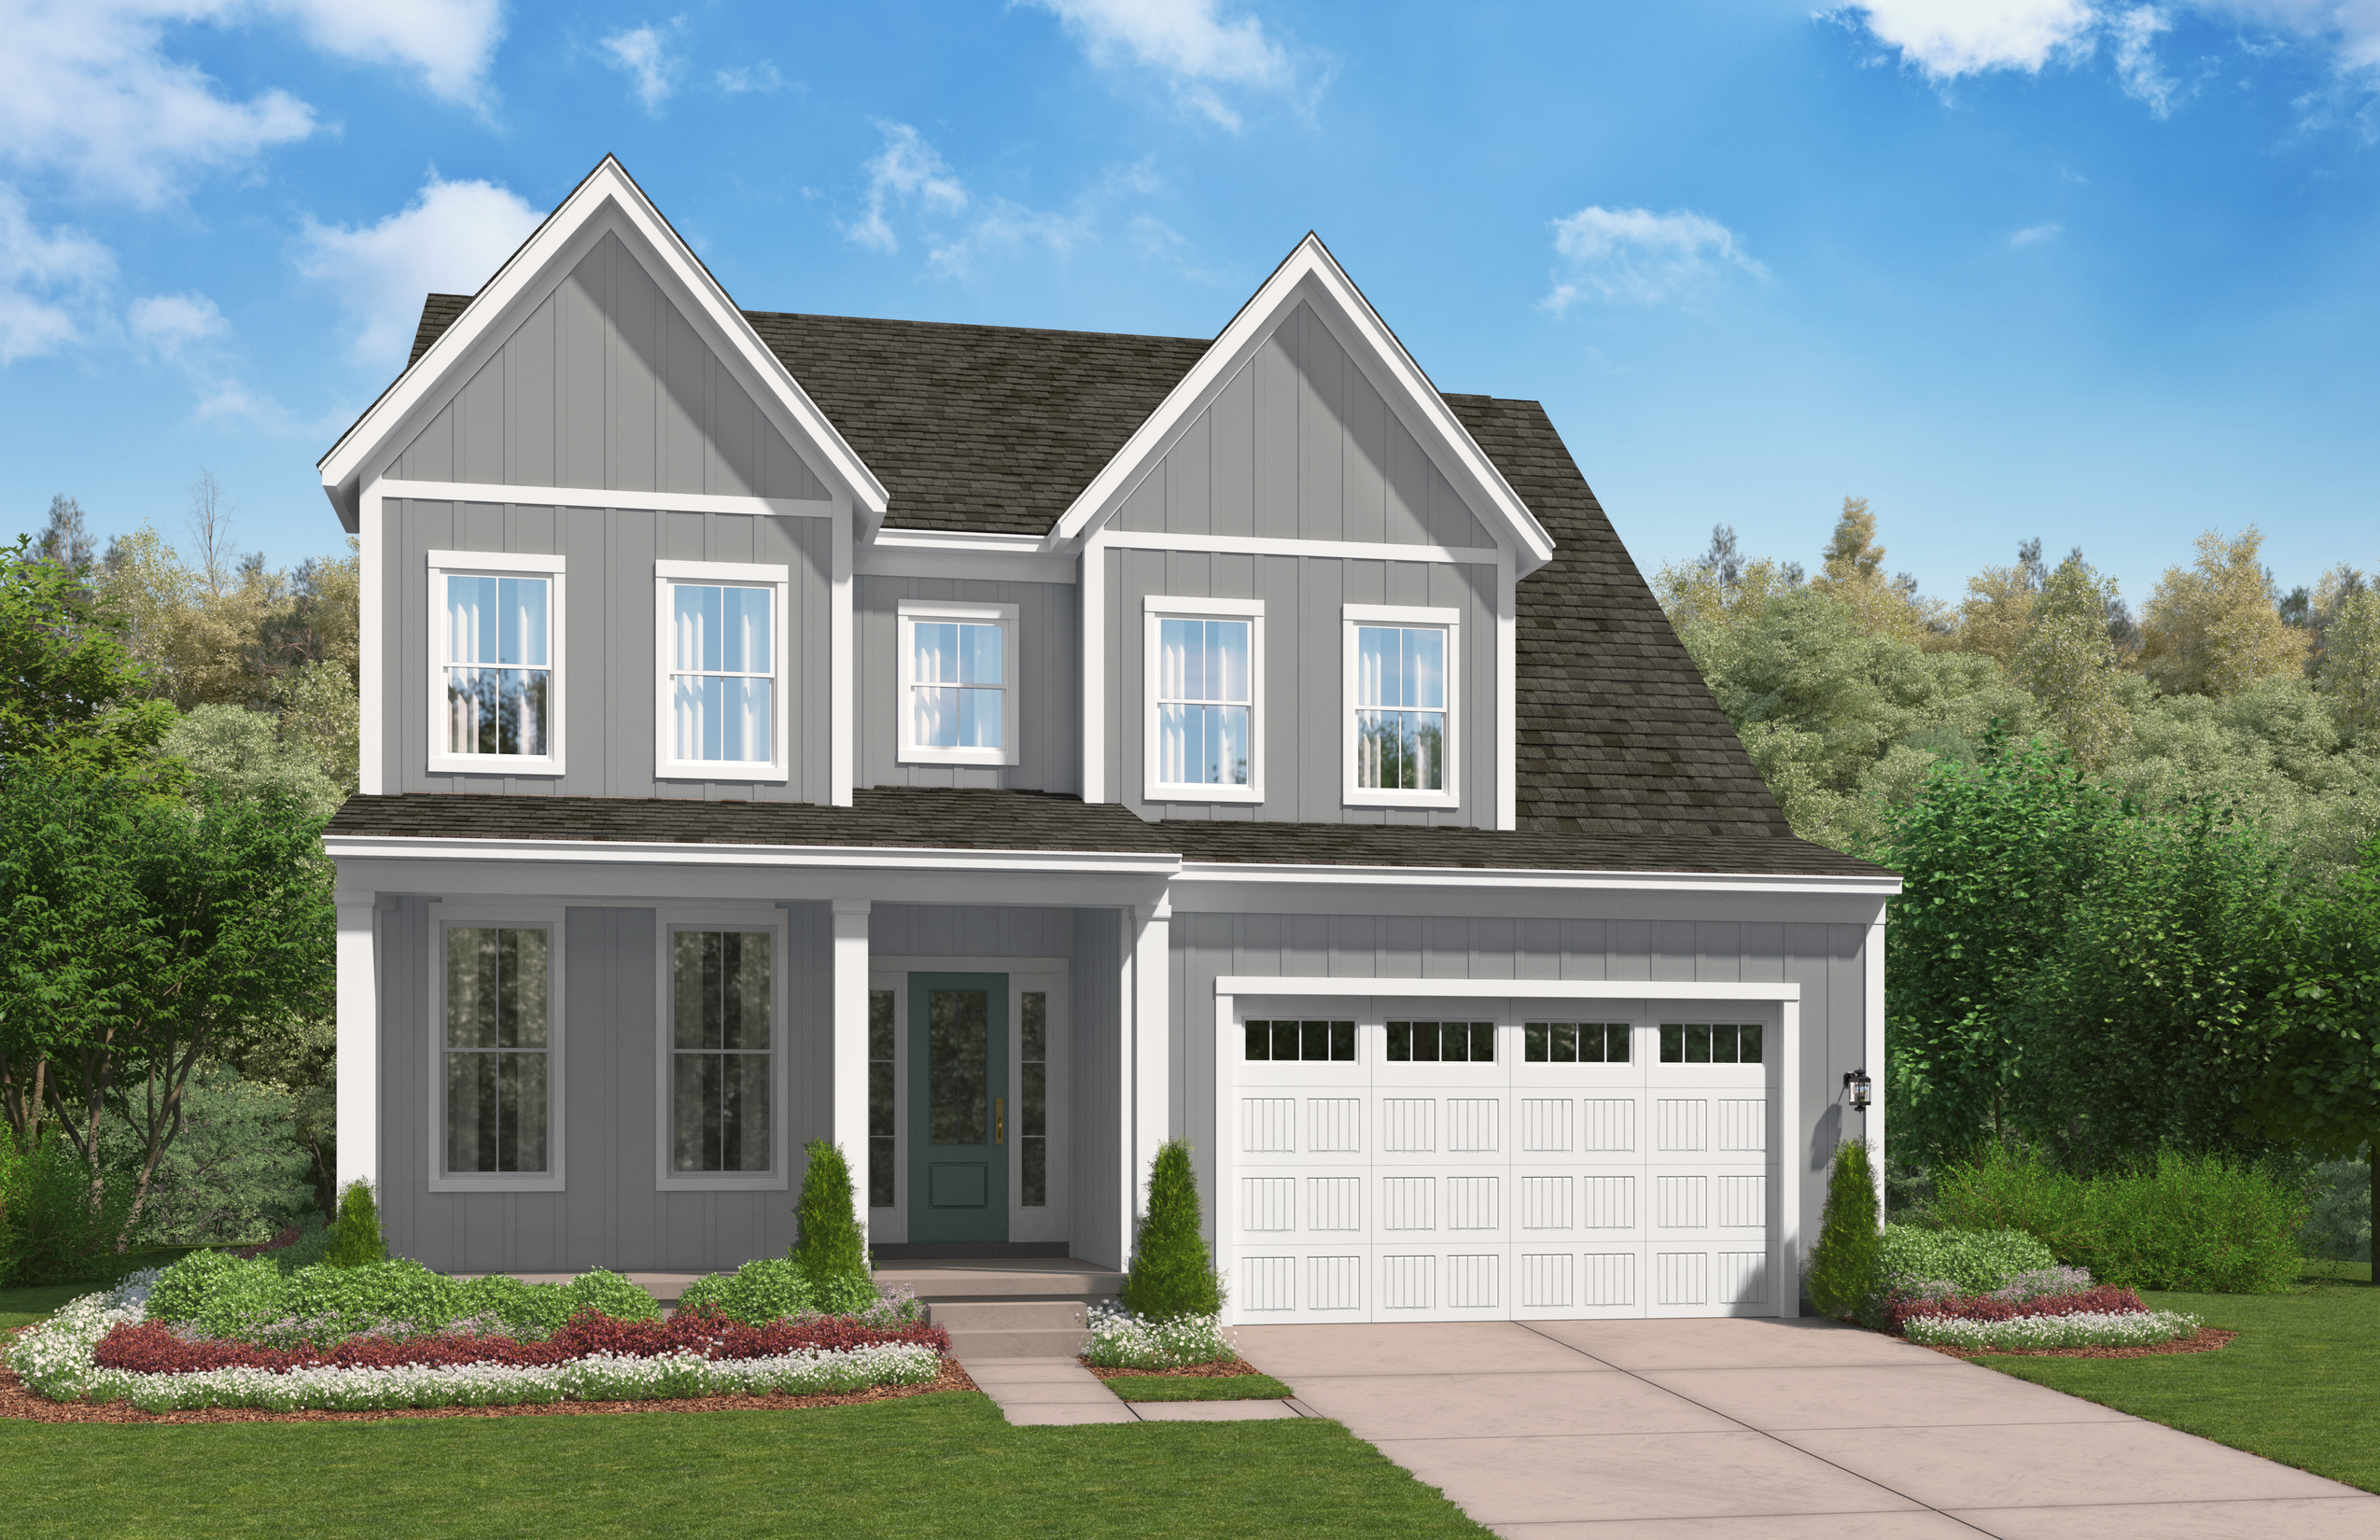 Stanley Martin Custom Homes can build a Scarlett Model on your lot in Northern Virginia or Montgomery County, Maryland.